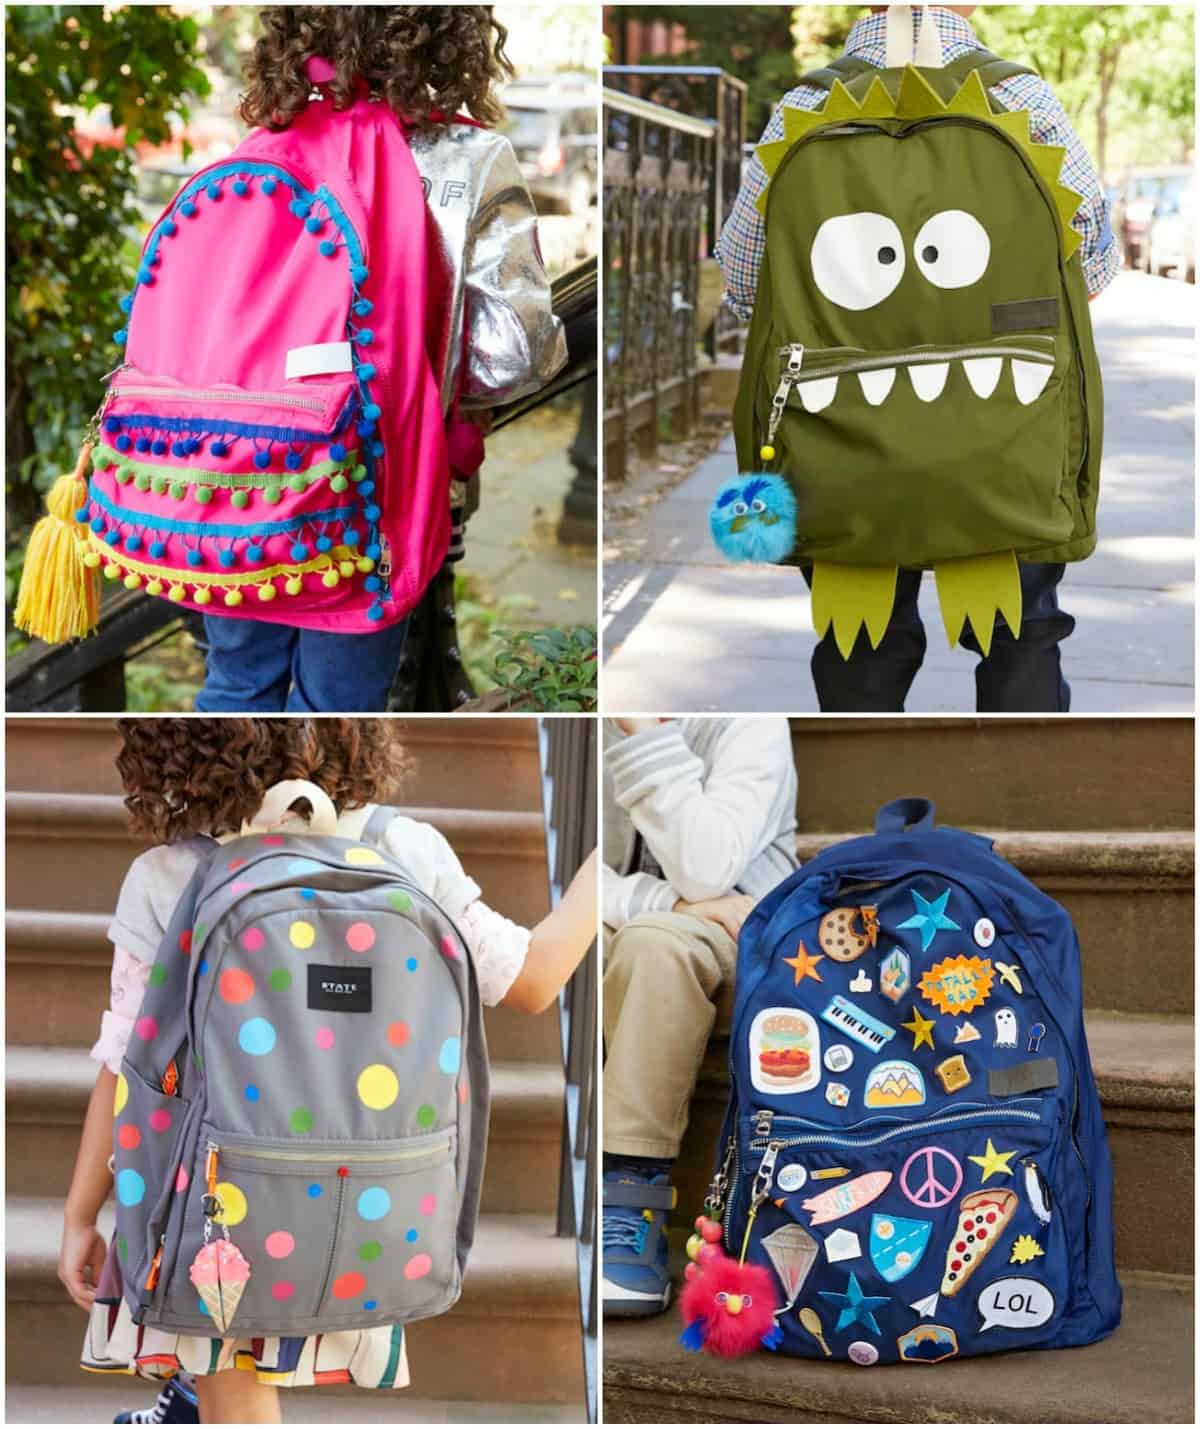 Five Ideas for Personalized Backpacks - DIY Candy